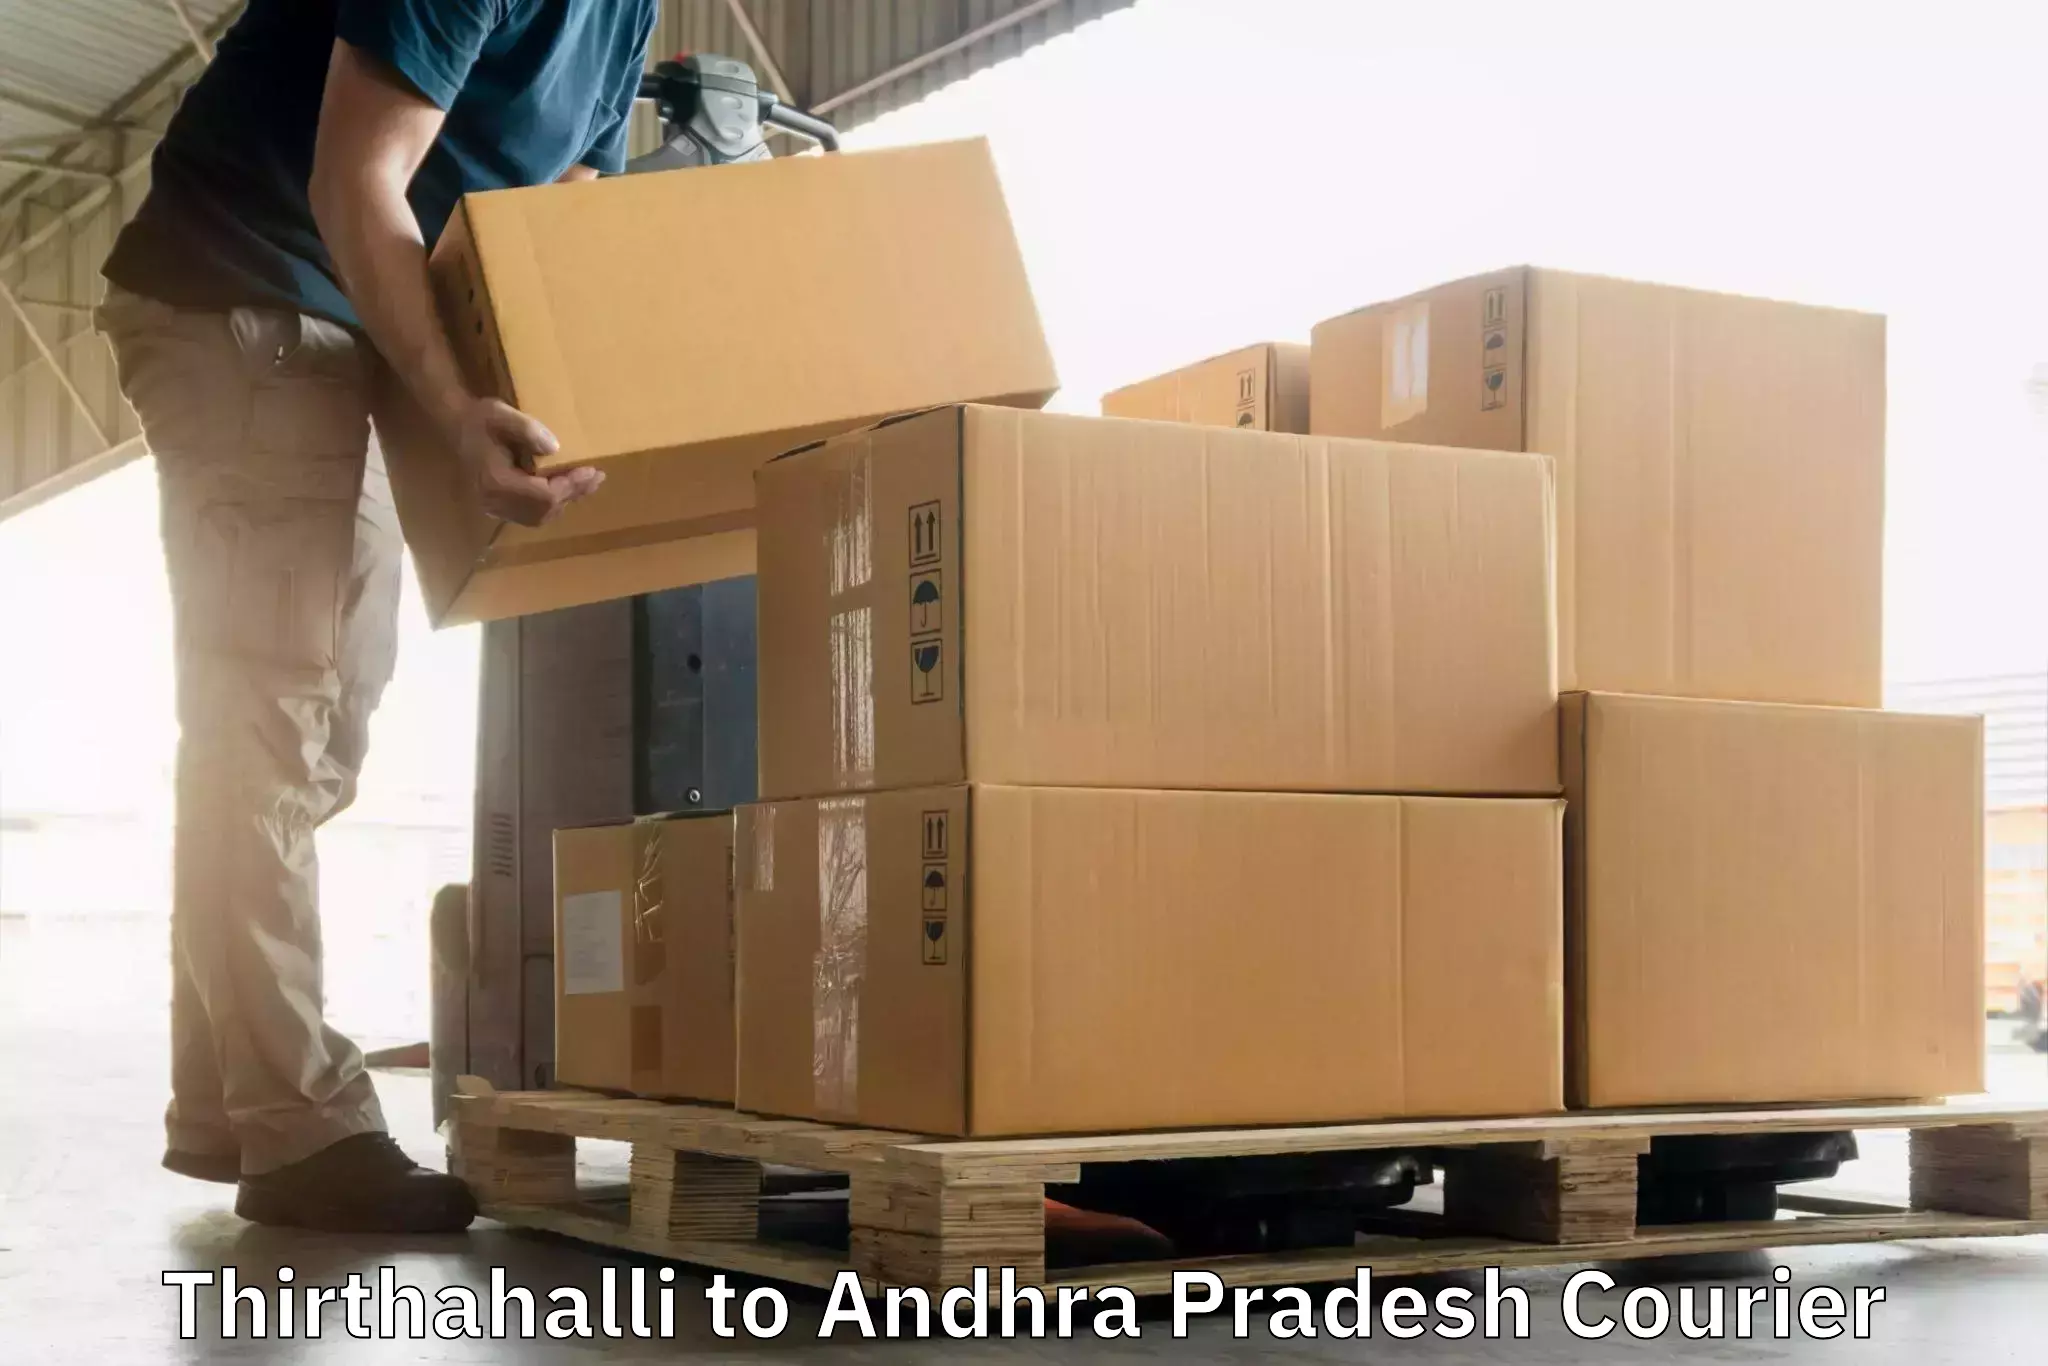 Package delivery network Thirthahalli to Giddalur